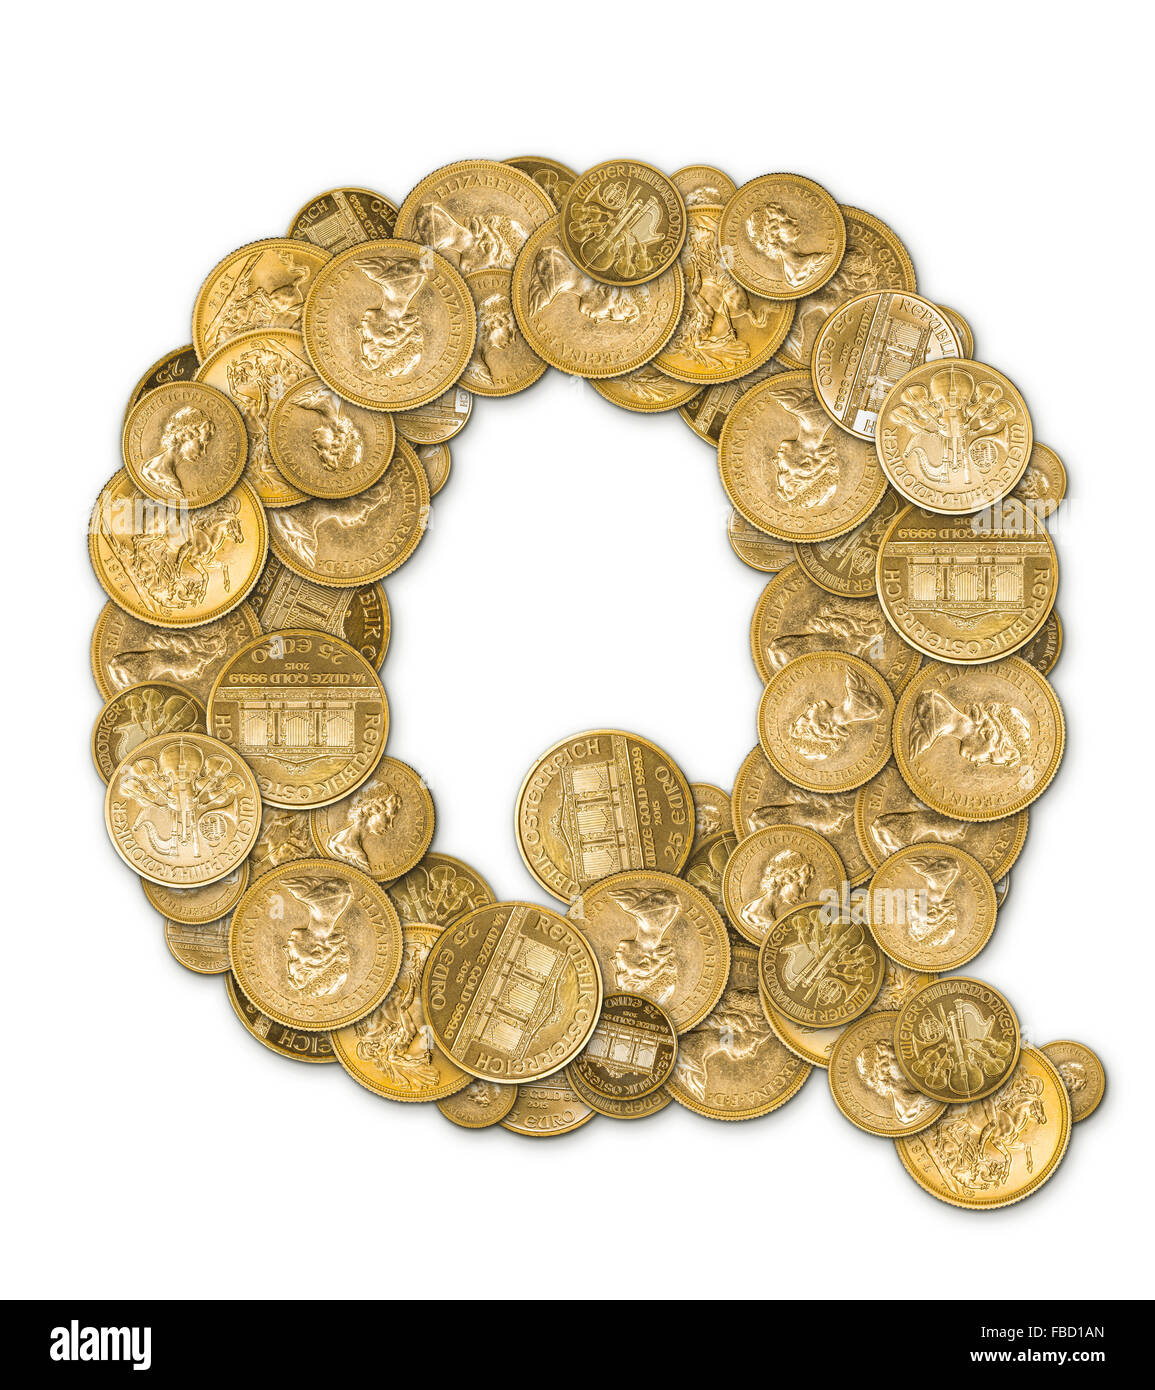 Letter Q made from gold coins money isolated on white background Stock Photo